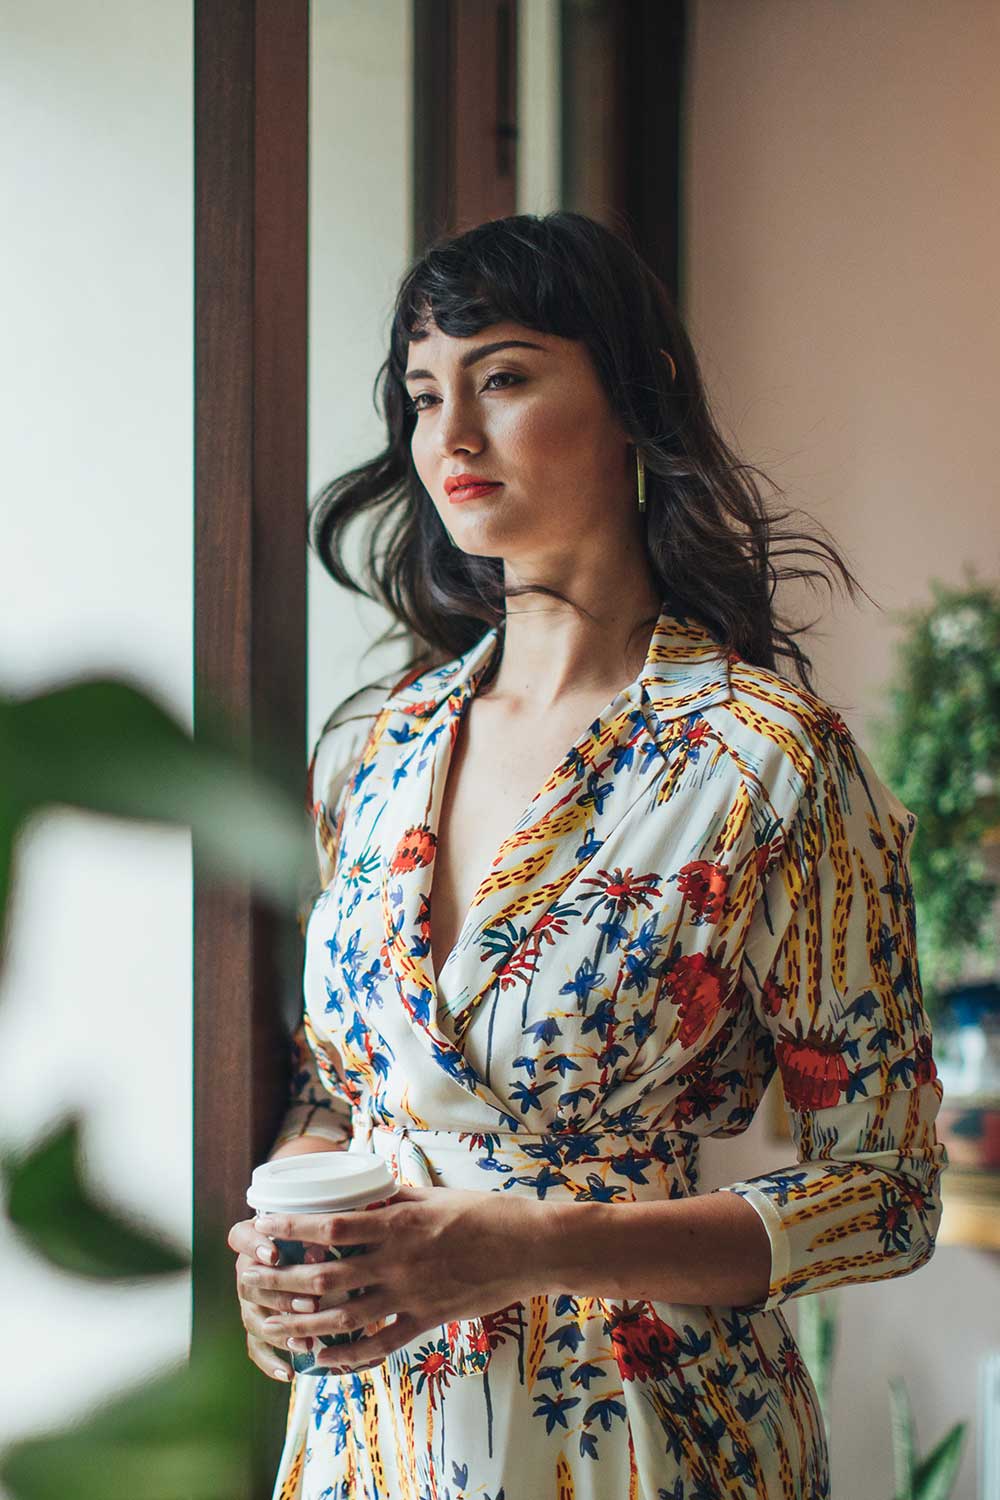 Woman with flower dress holding coffee.